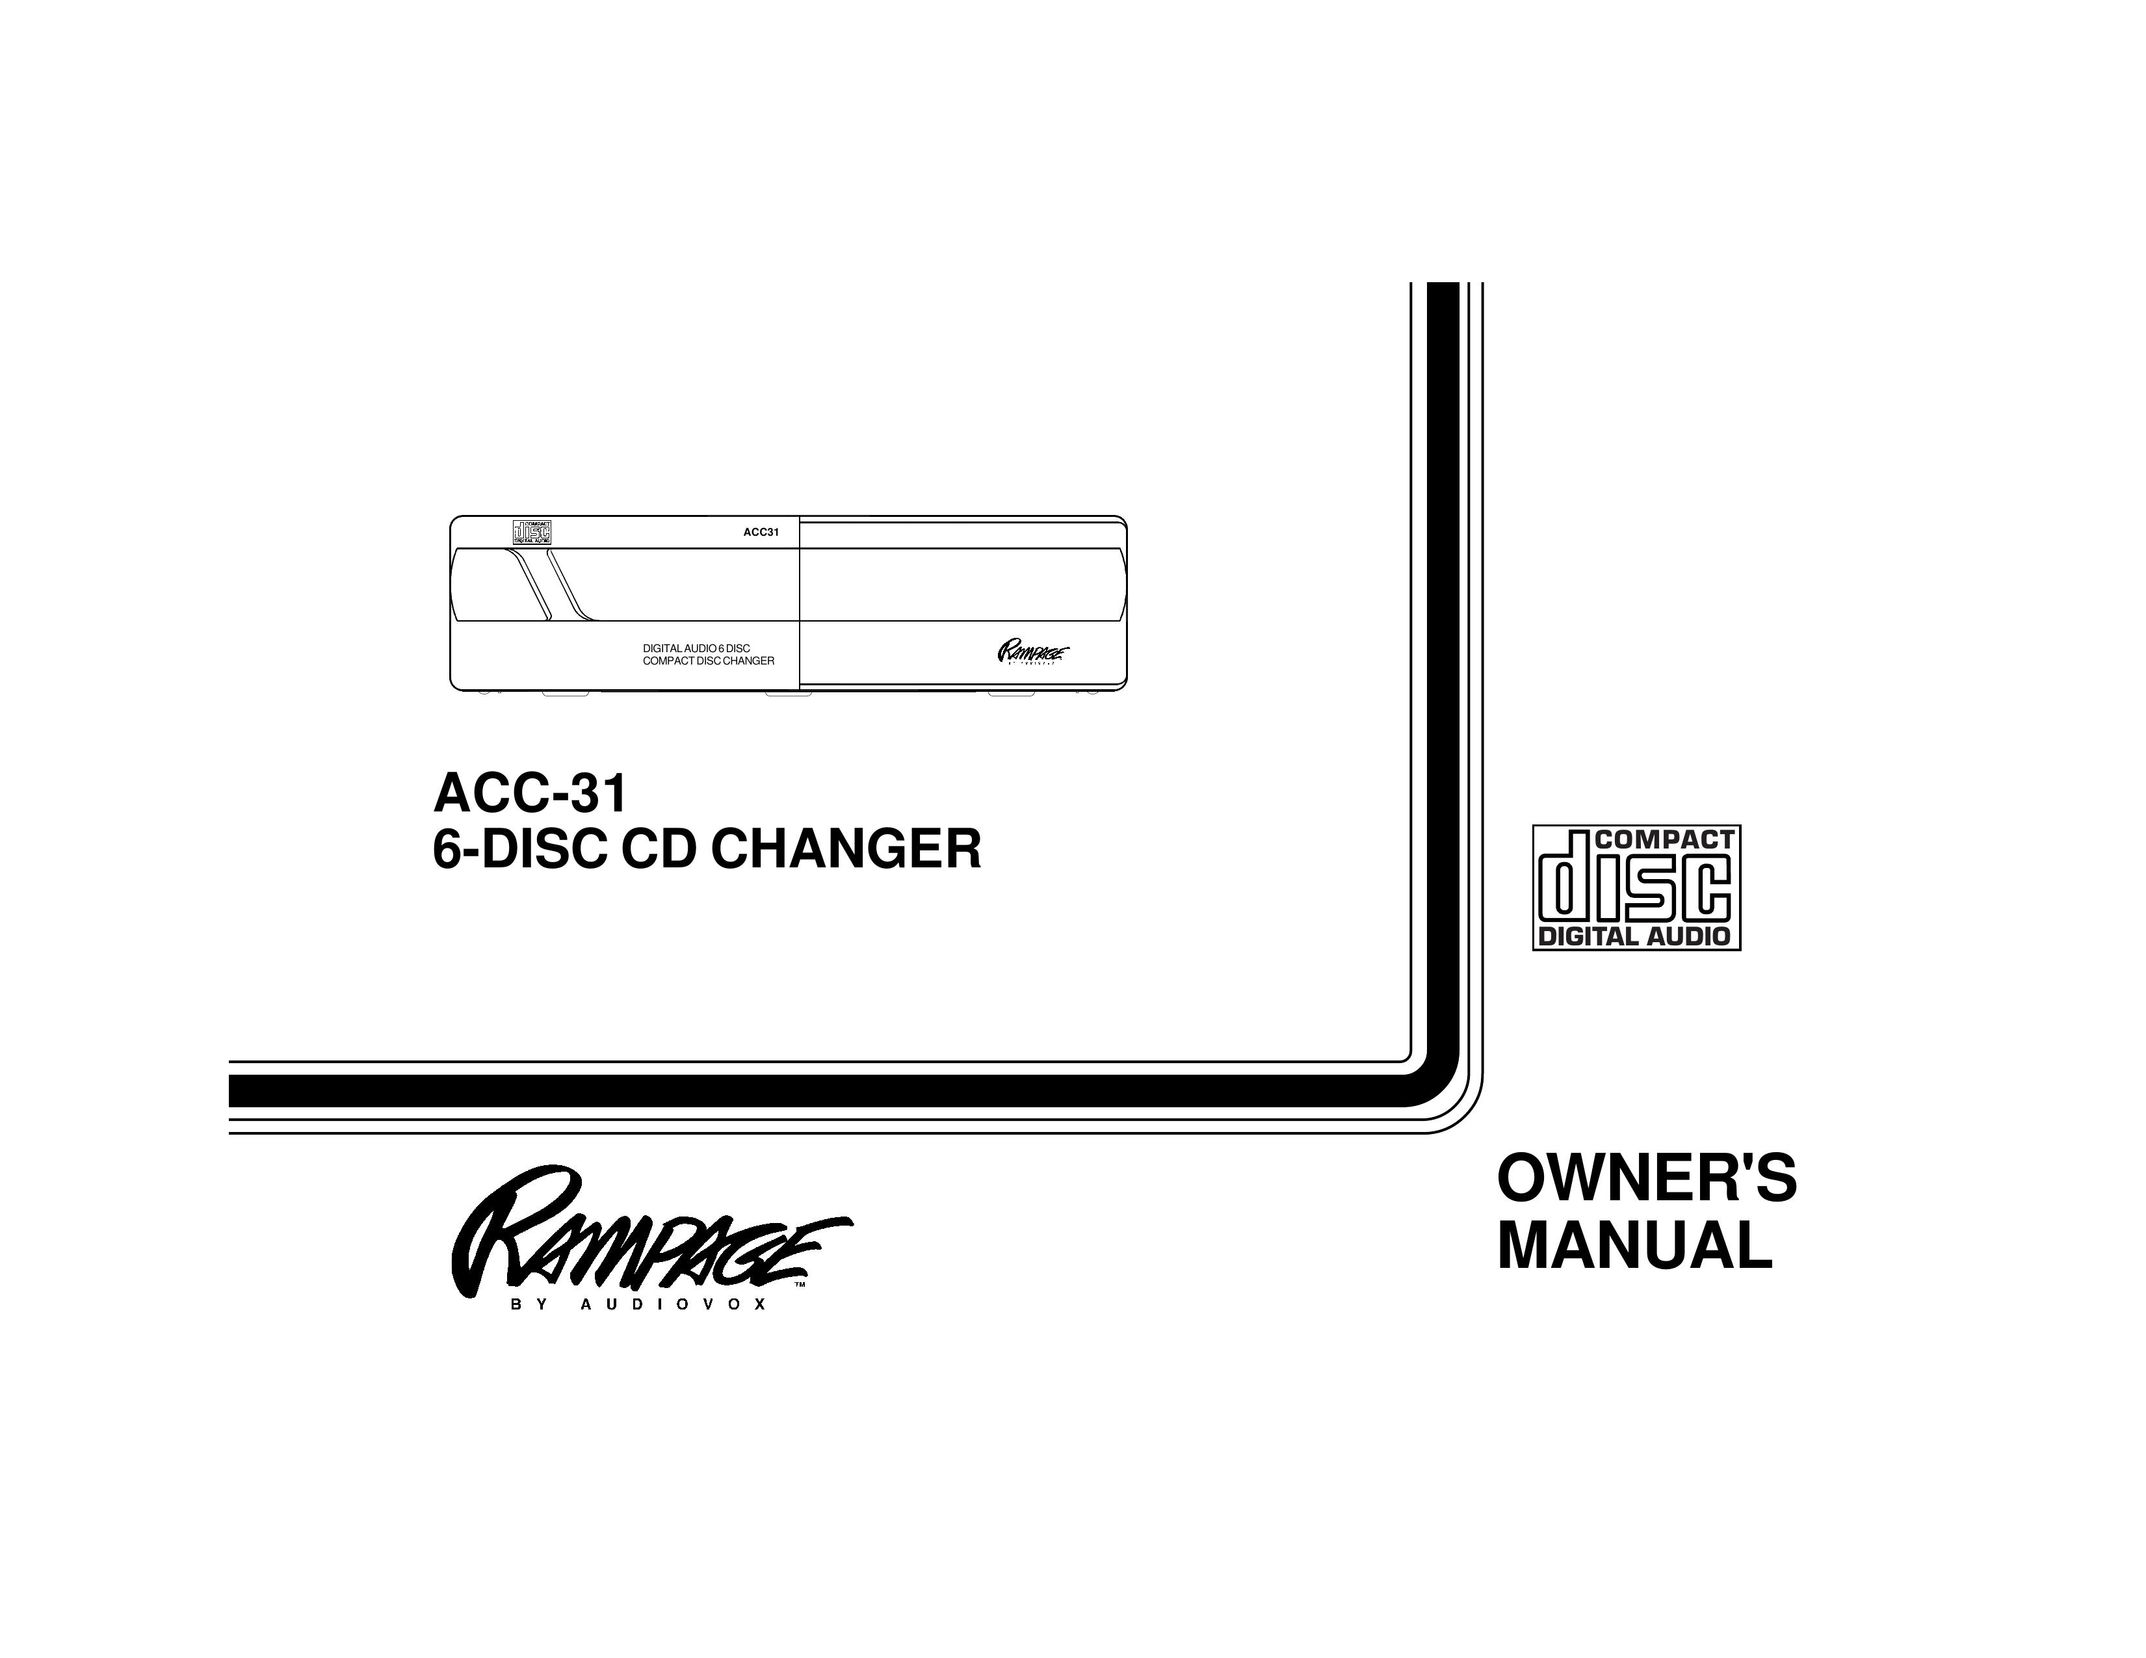 Audiovox ACC31 CD Player User Manual (Page 1)